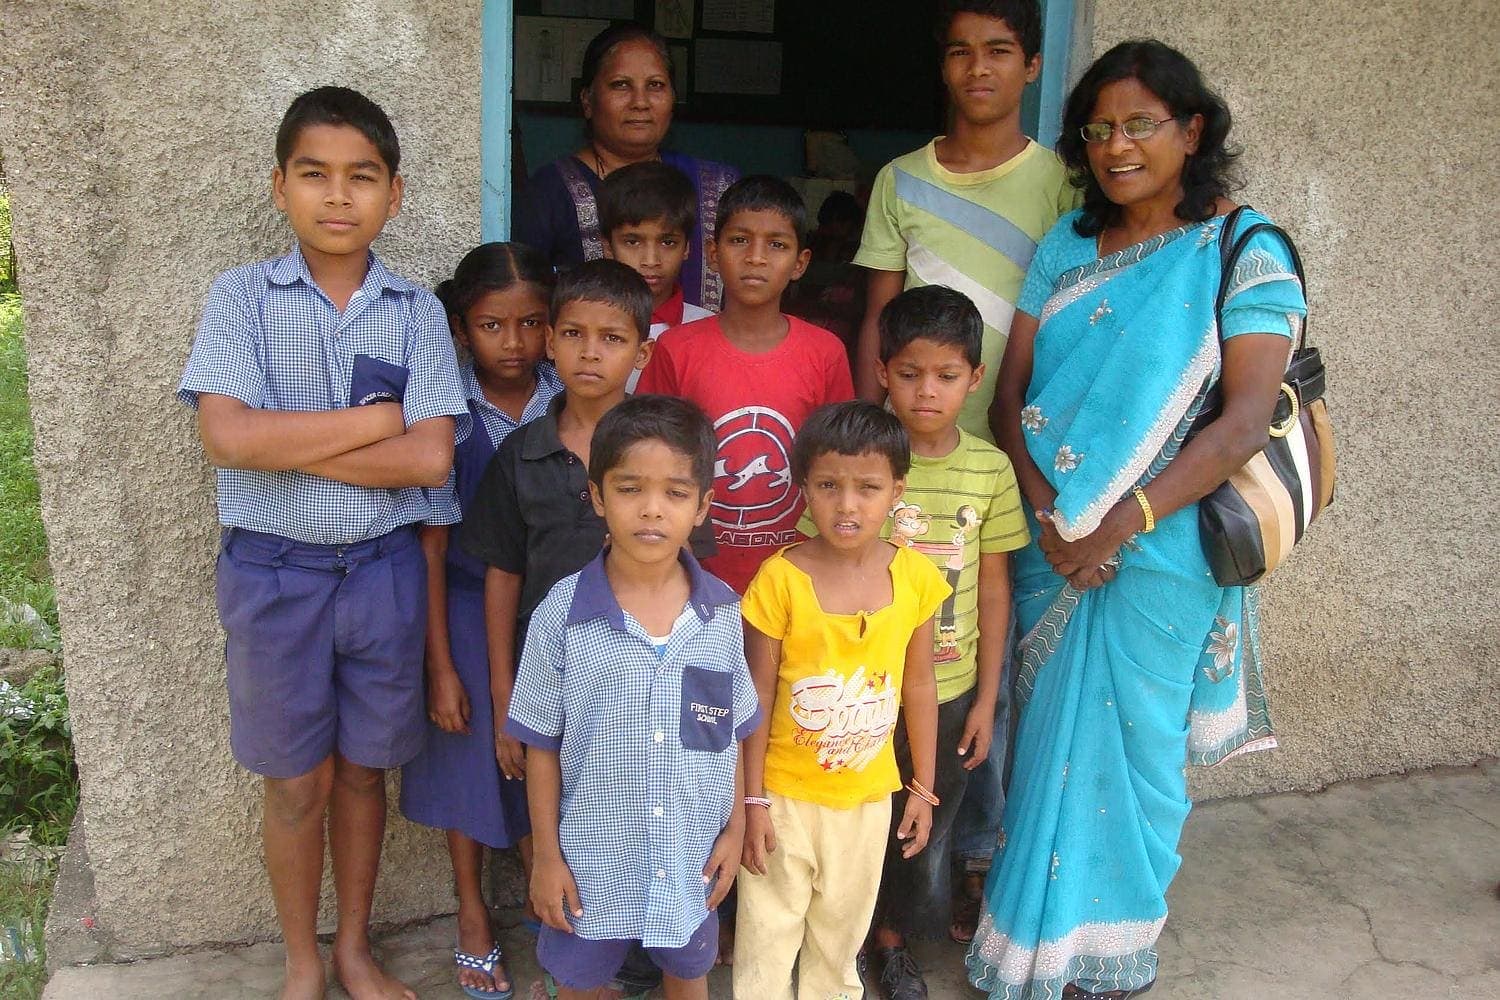  Dr. Solomon (far right), poses with students she met at a school in Pune, India, while conducting teacher training and exploratory studies. [Photo: La Sierra University]